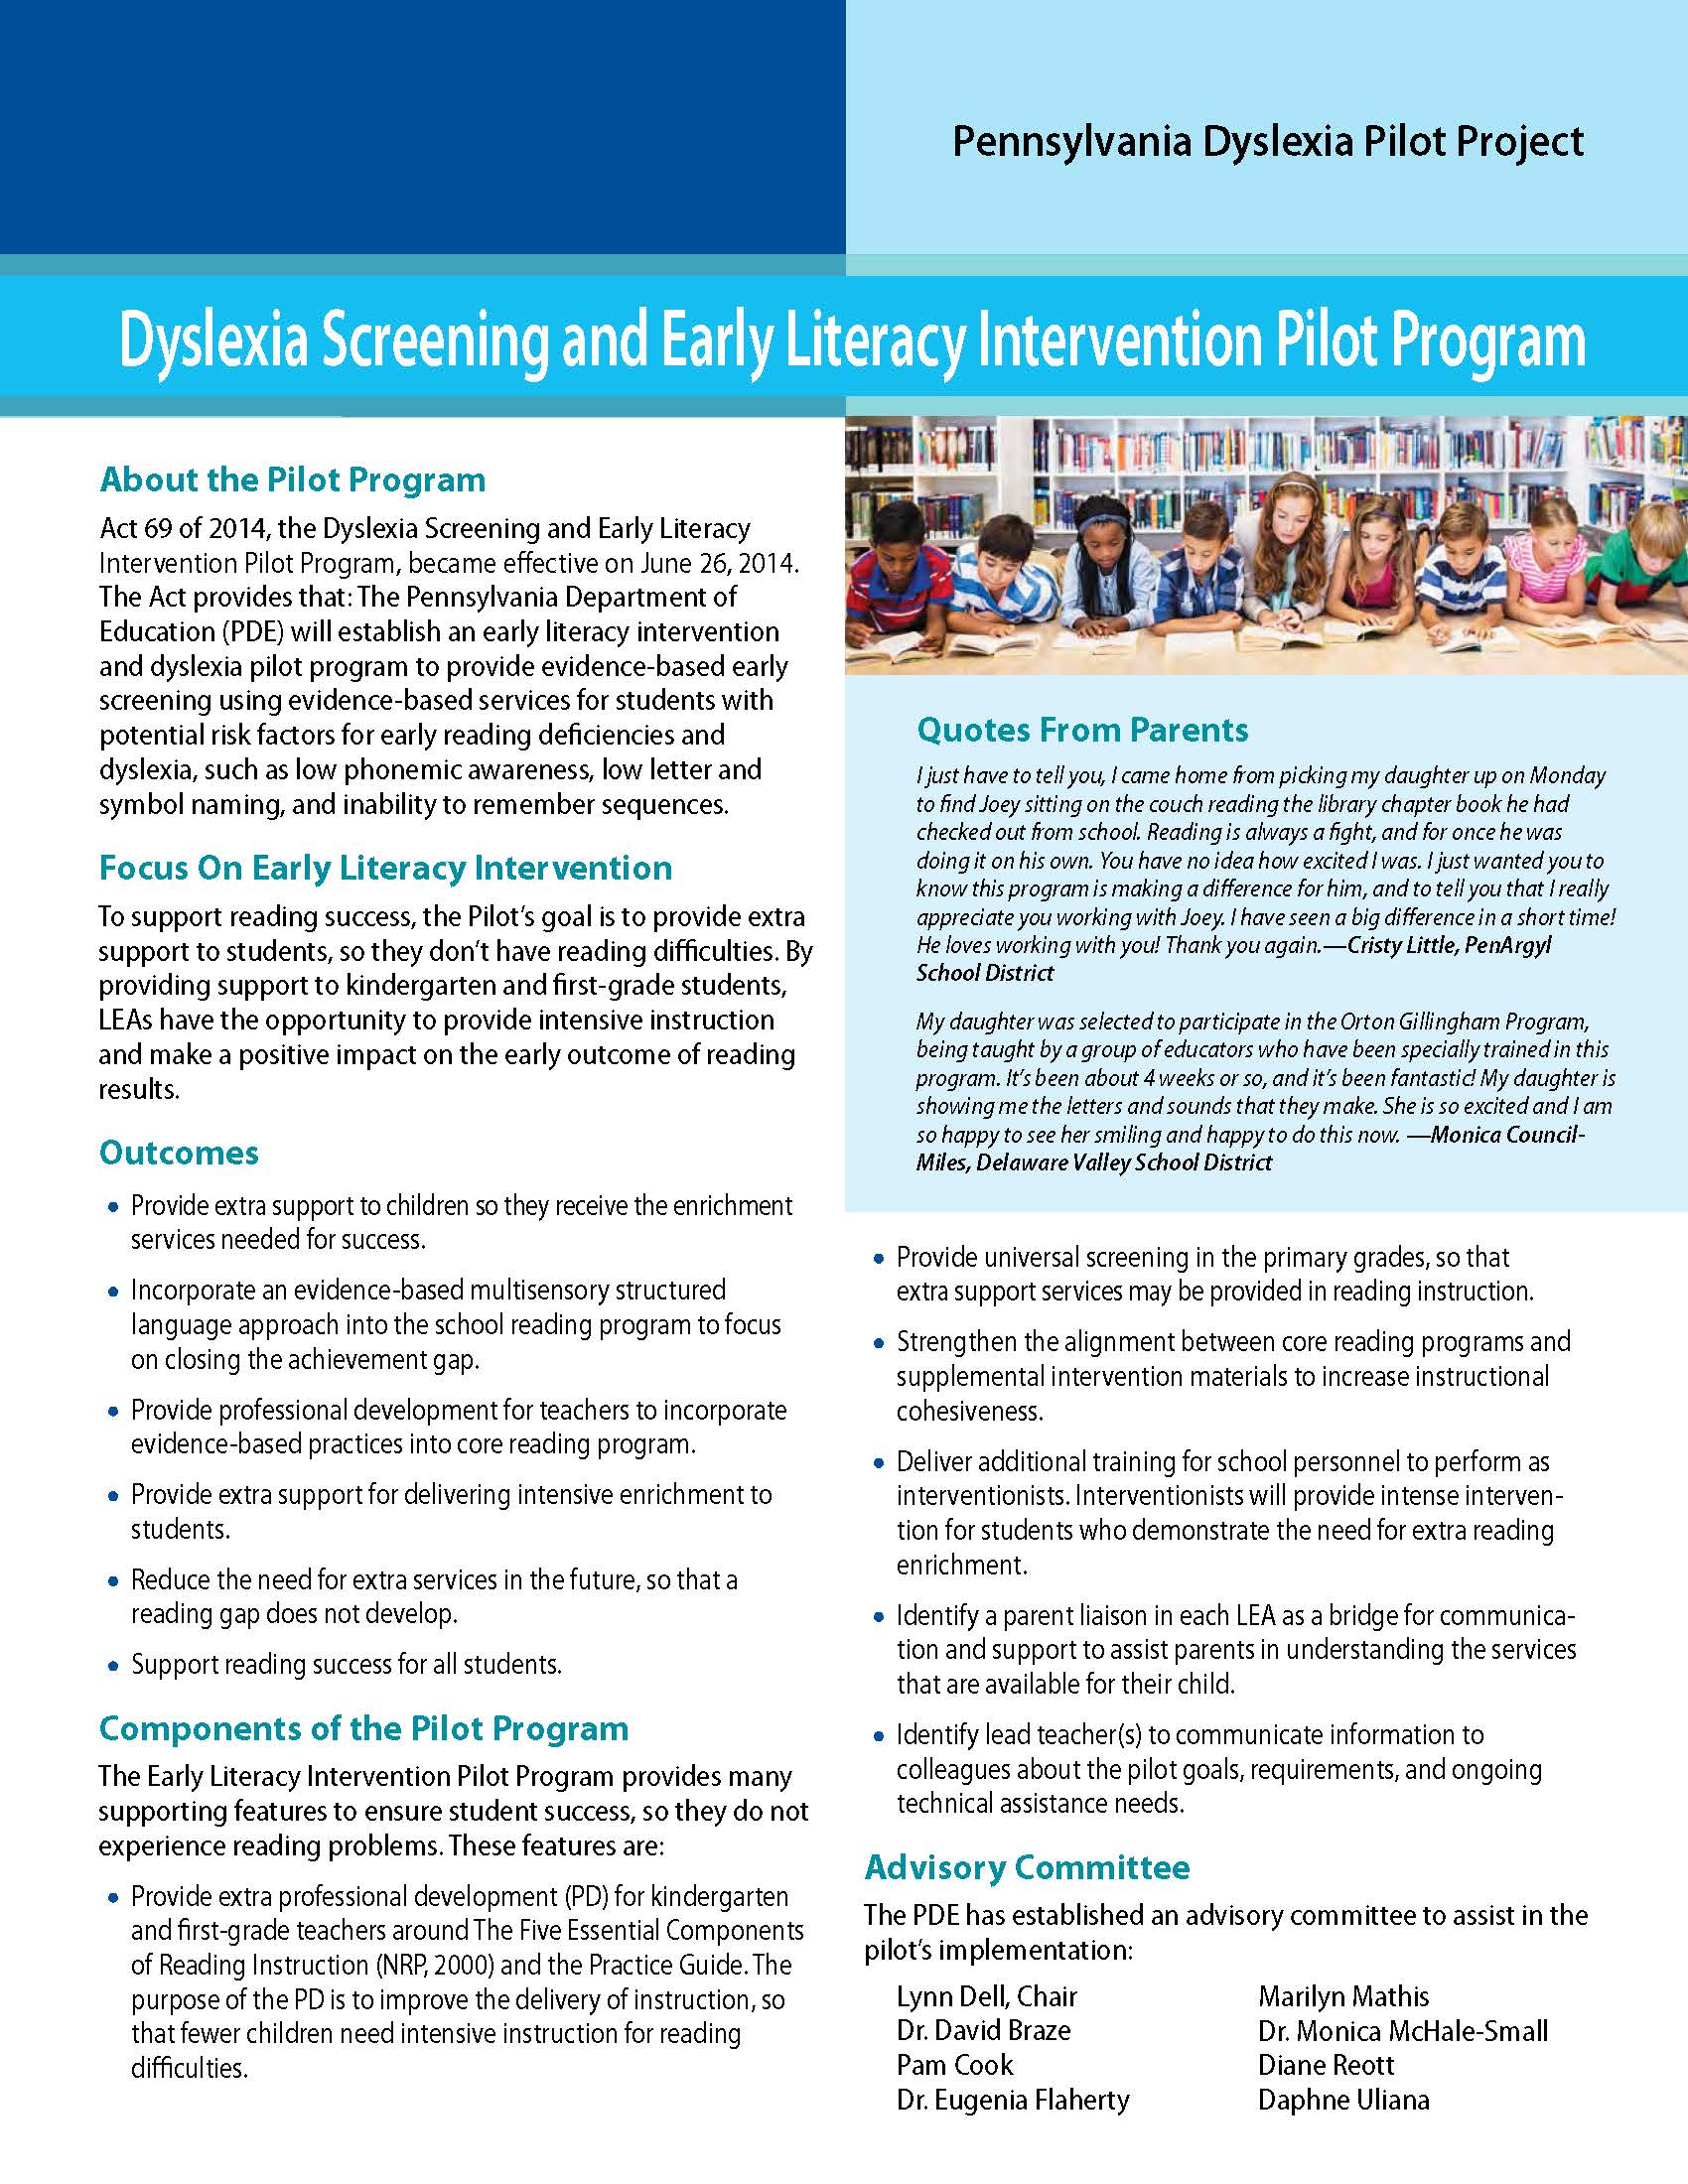 Dyslexia Screening and Early Literacy Intervention Pilot Program